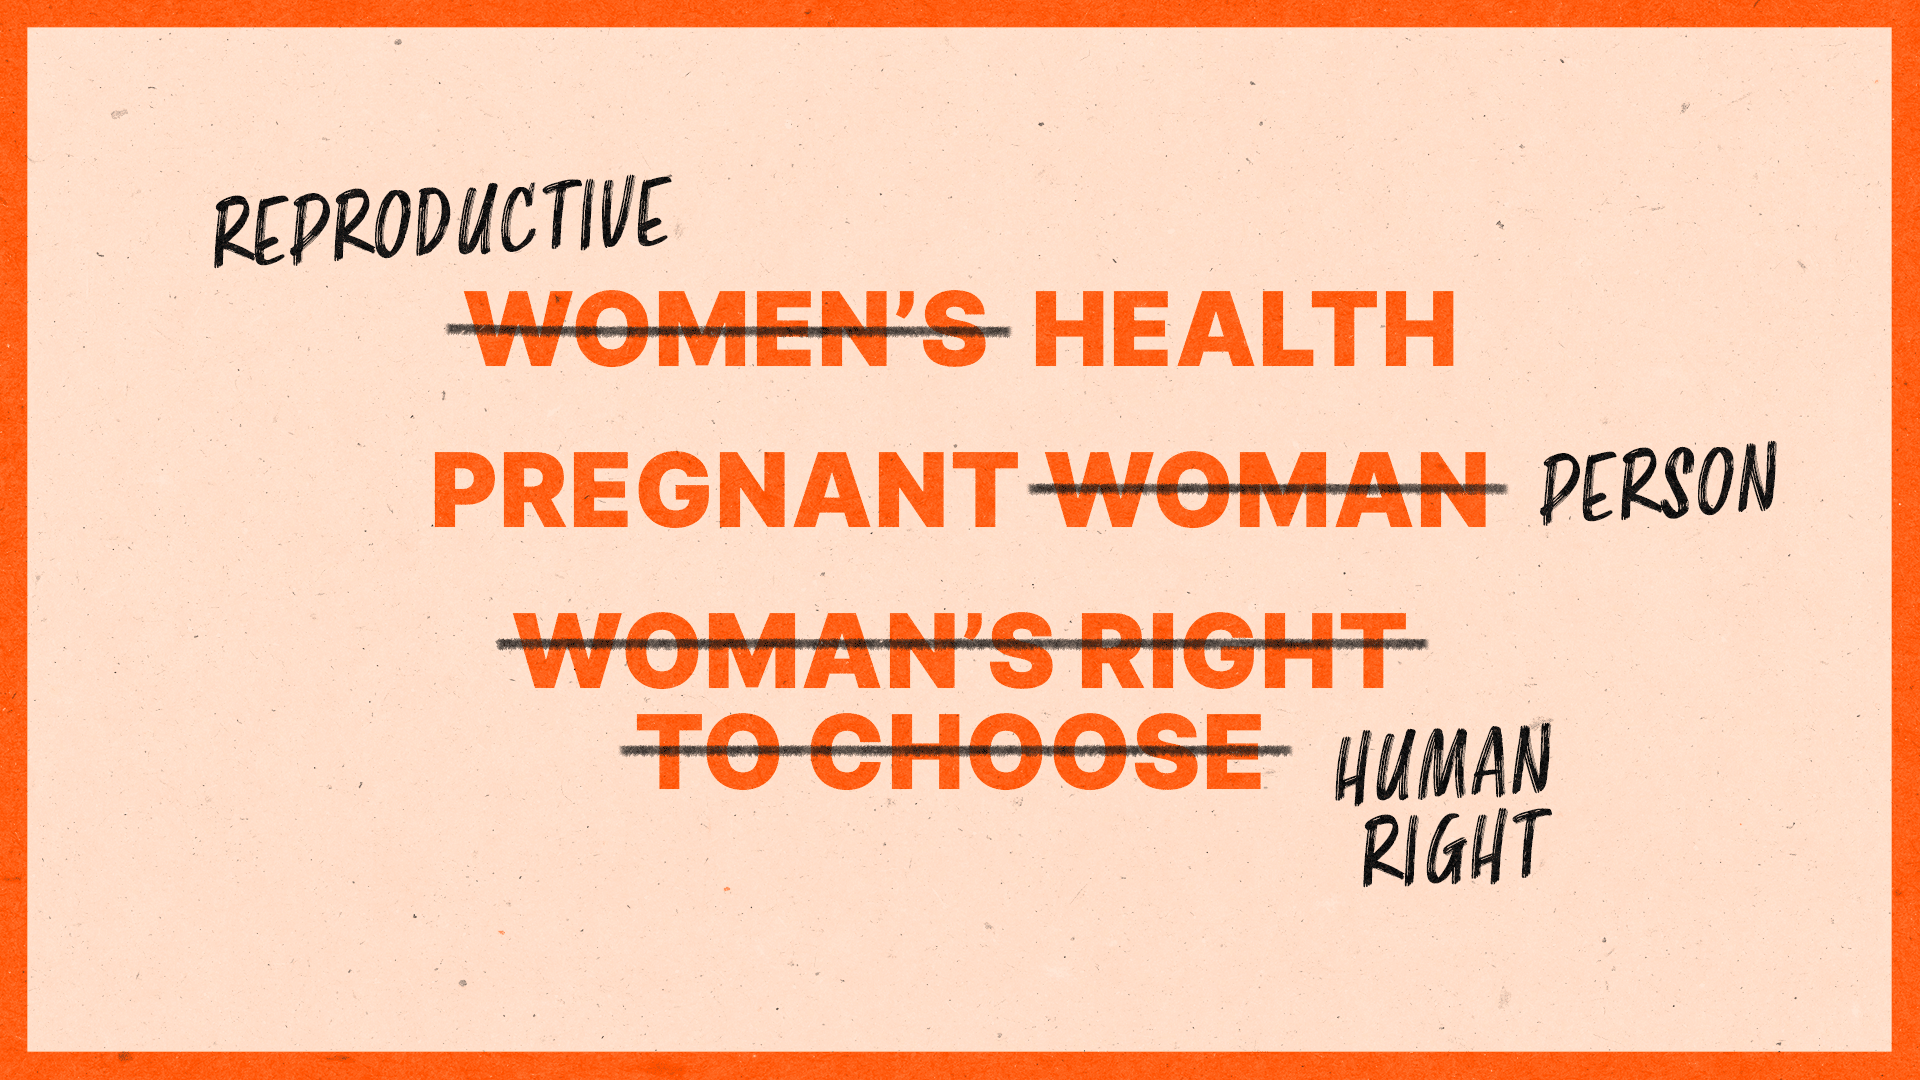 Graphic showing inclusive language - "women's health" with "women's" crossed out and replaced with "reproductive". "Pregnant woman" with "woman" crossed out and replaced with "person". 'Woman's right" to choose crossed out and replaced with "human right"